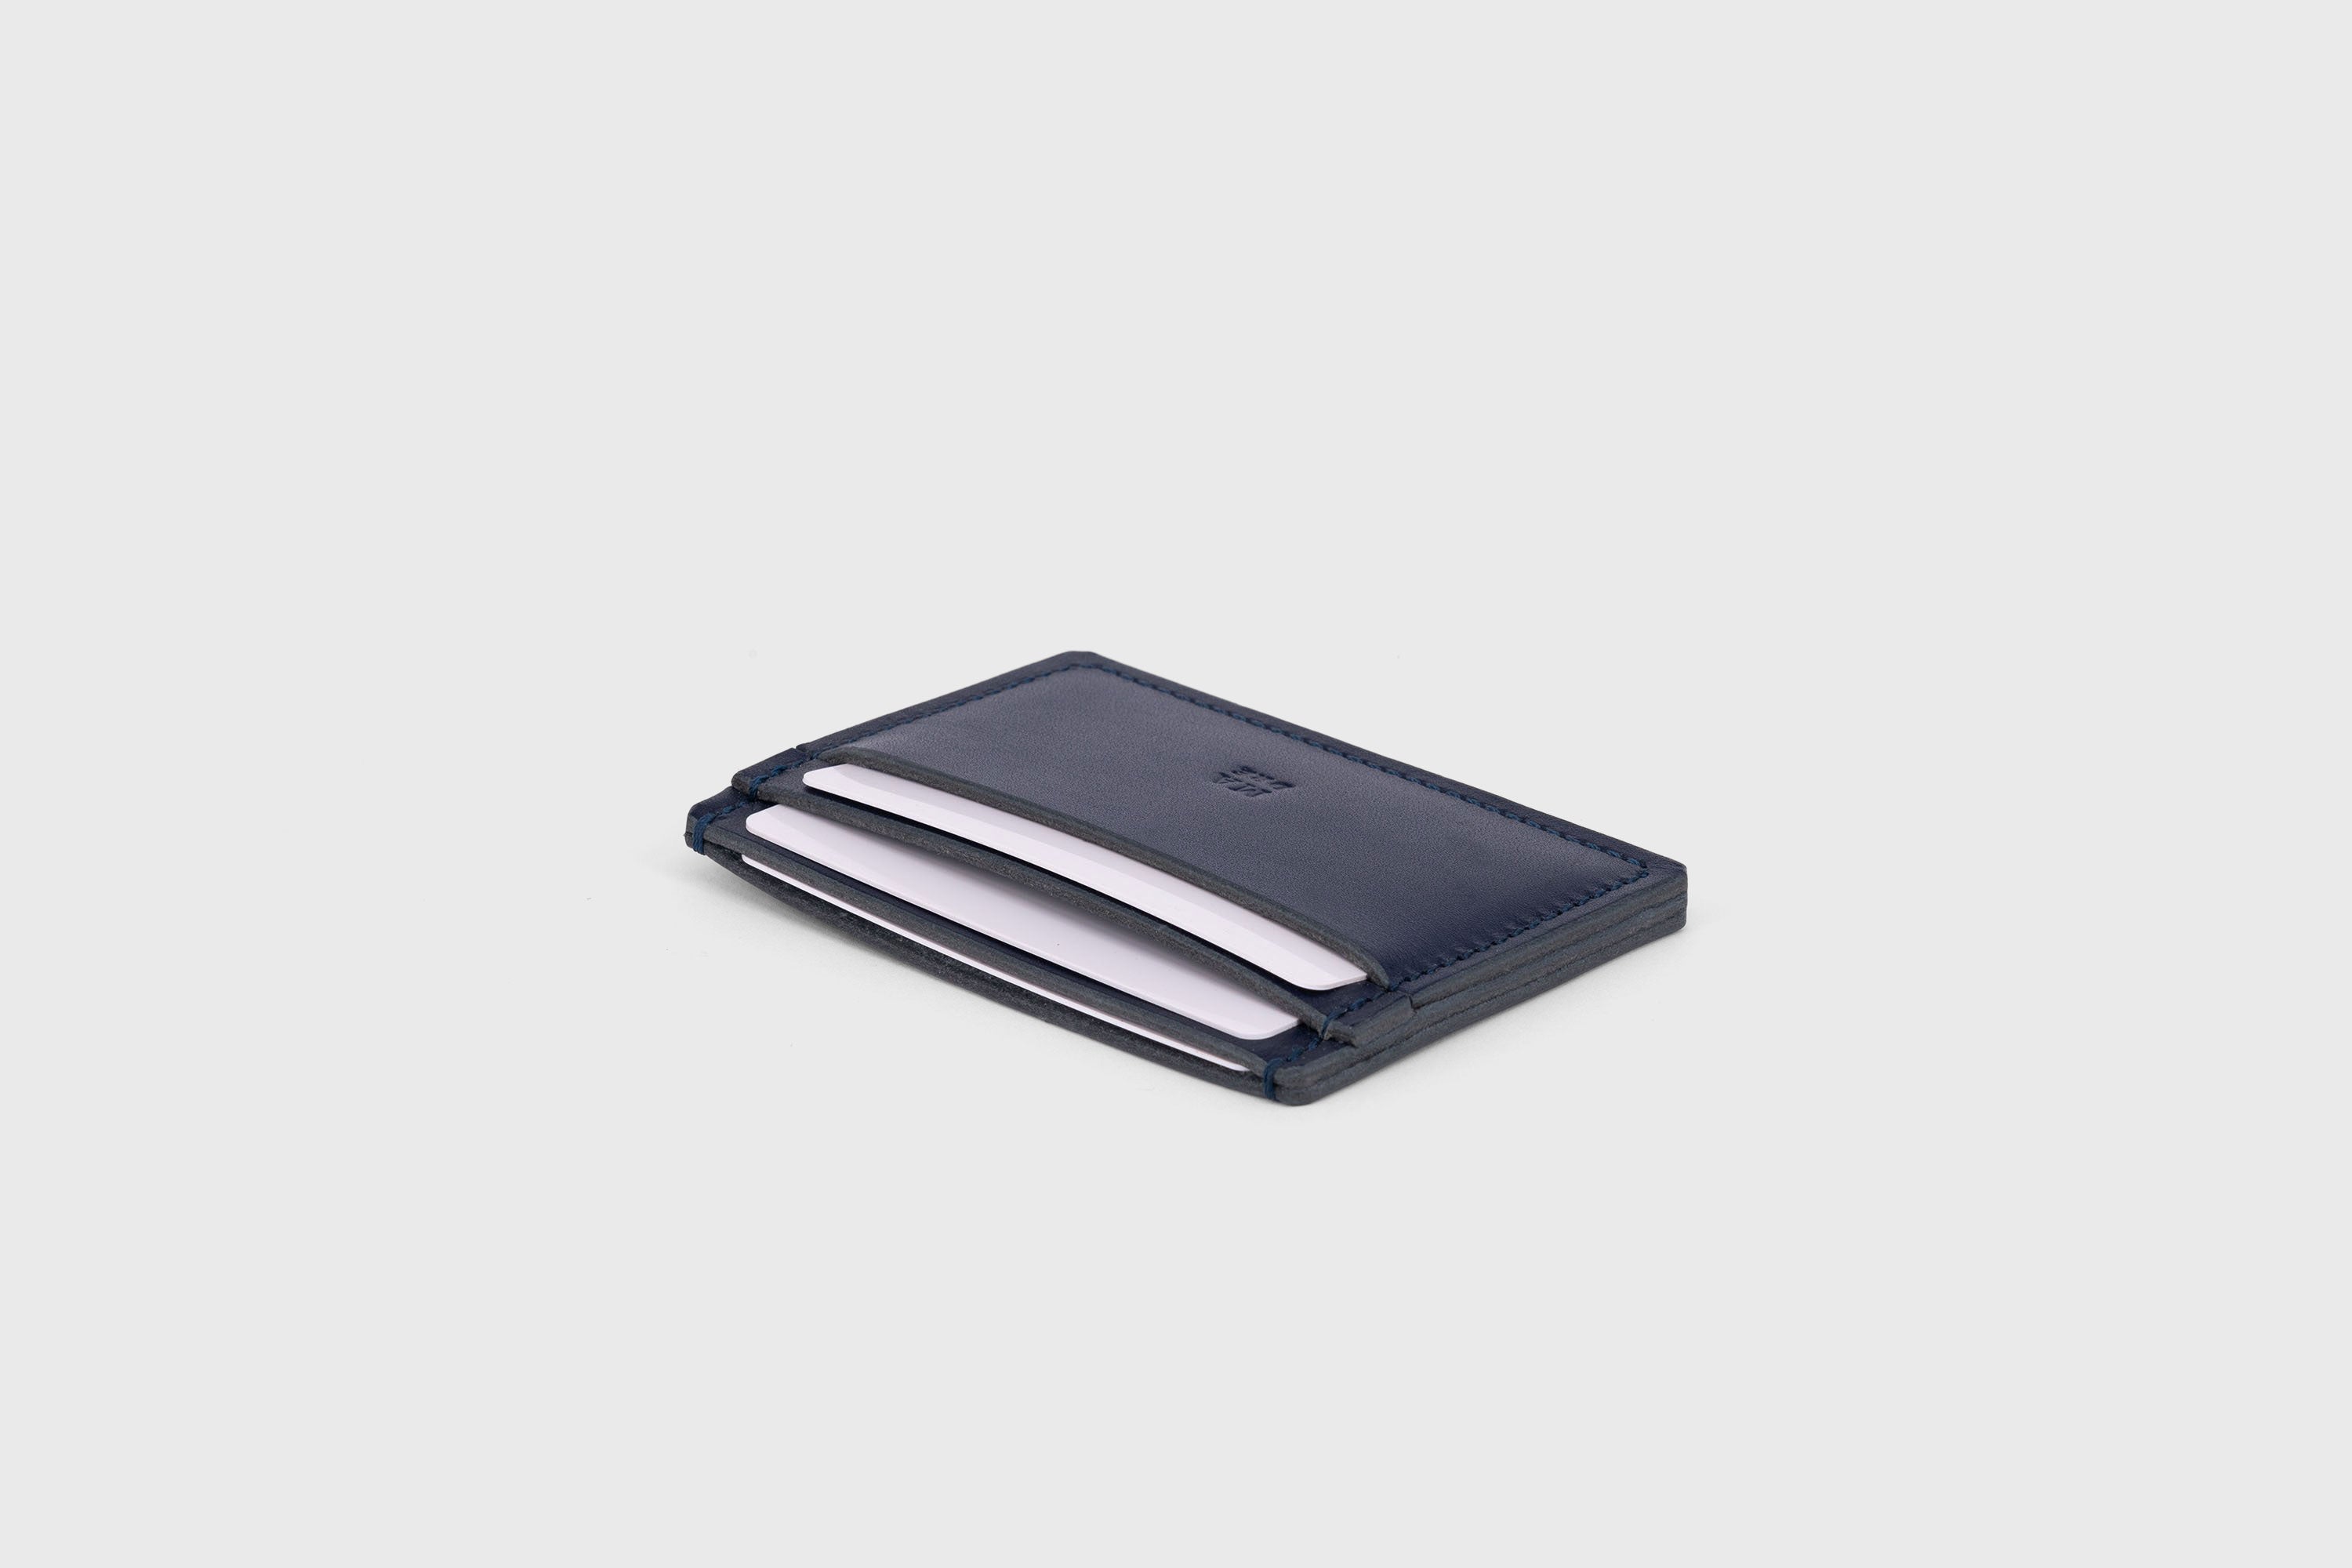 Credit Card Wallet in Marine Blue Leather Vachetta Vegetable Tanned Leather Handmade and Simplistic Design by Atelier Madre Manuel Dreesmann Barcelona Spain